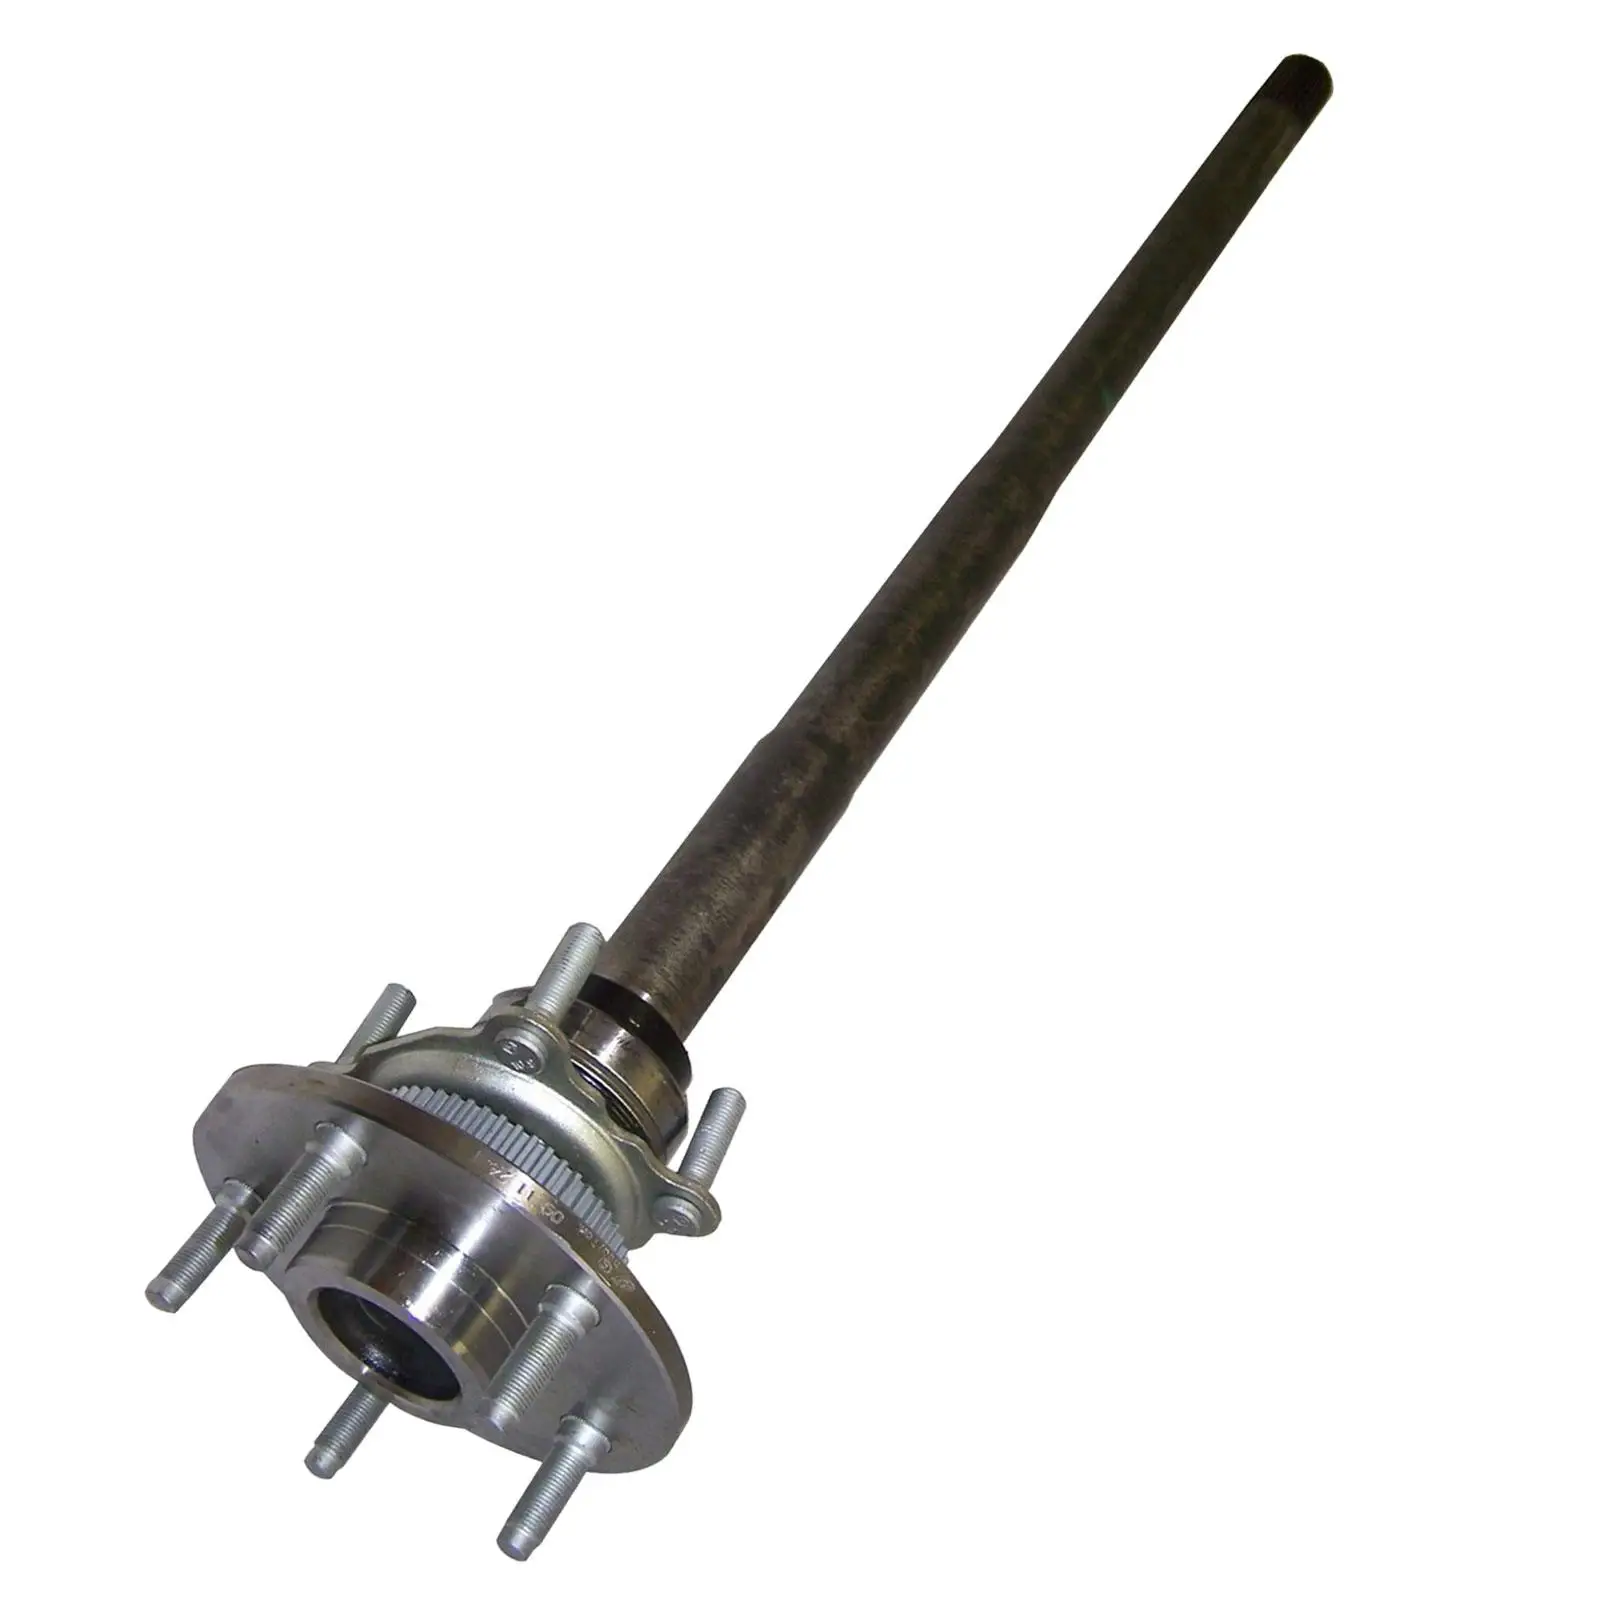 Rear Axle Shaft Assembly 68003272AA for Jeep Wrangler JK 07-18 Stable Performance Easily to Install Accessories